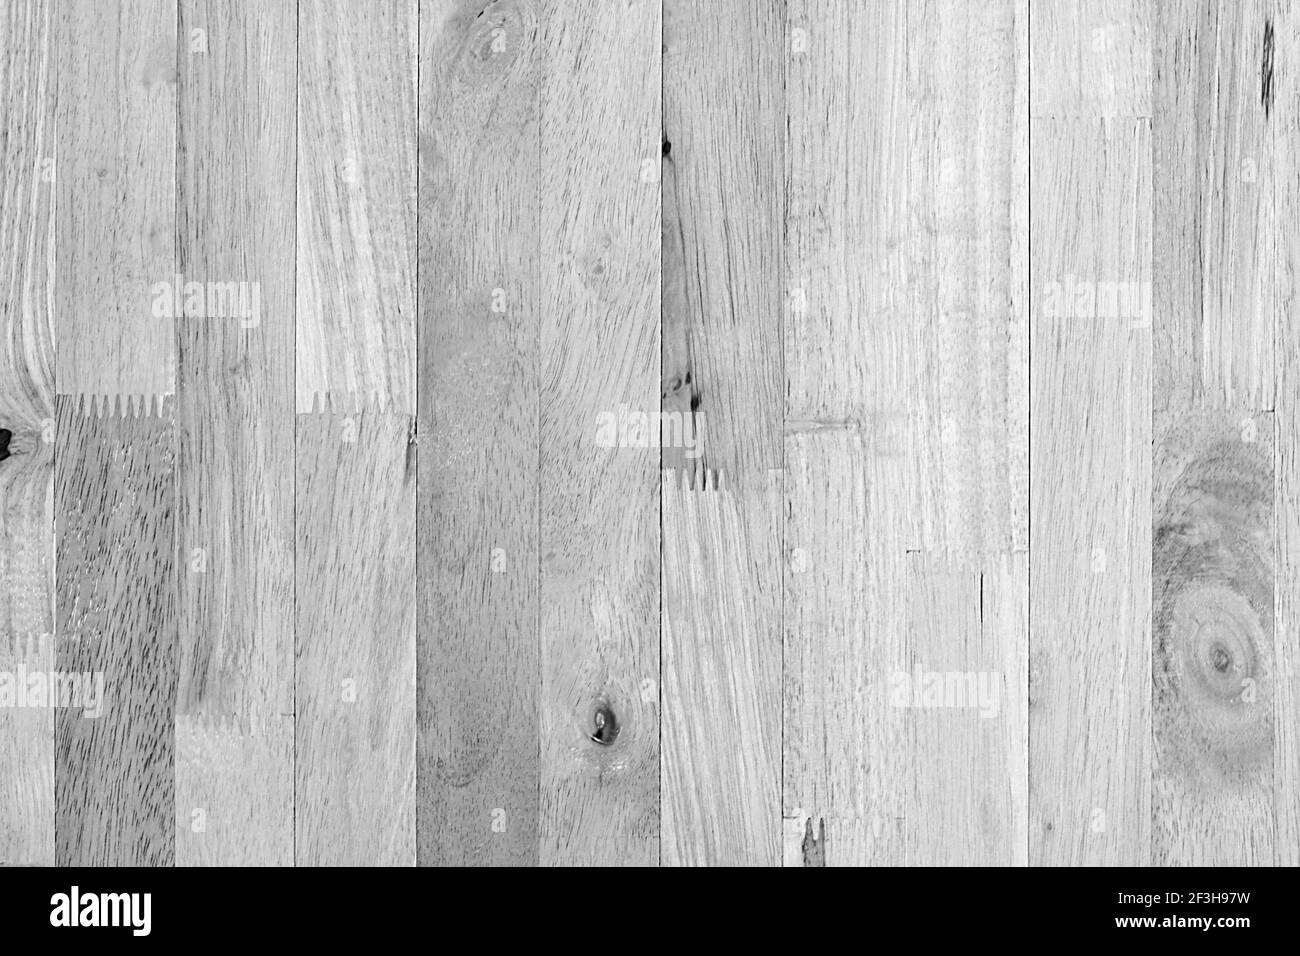 Light wood texture background with monochrome effect Stock Photo